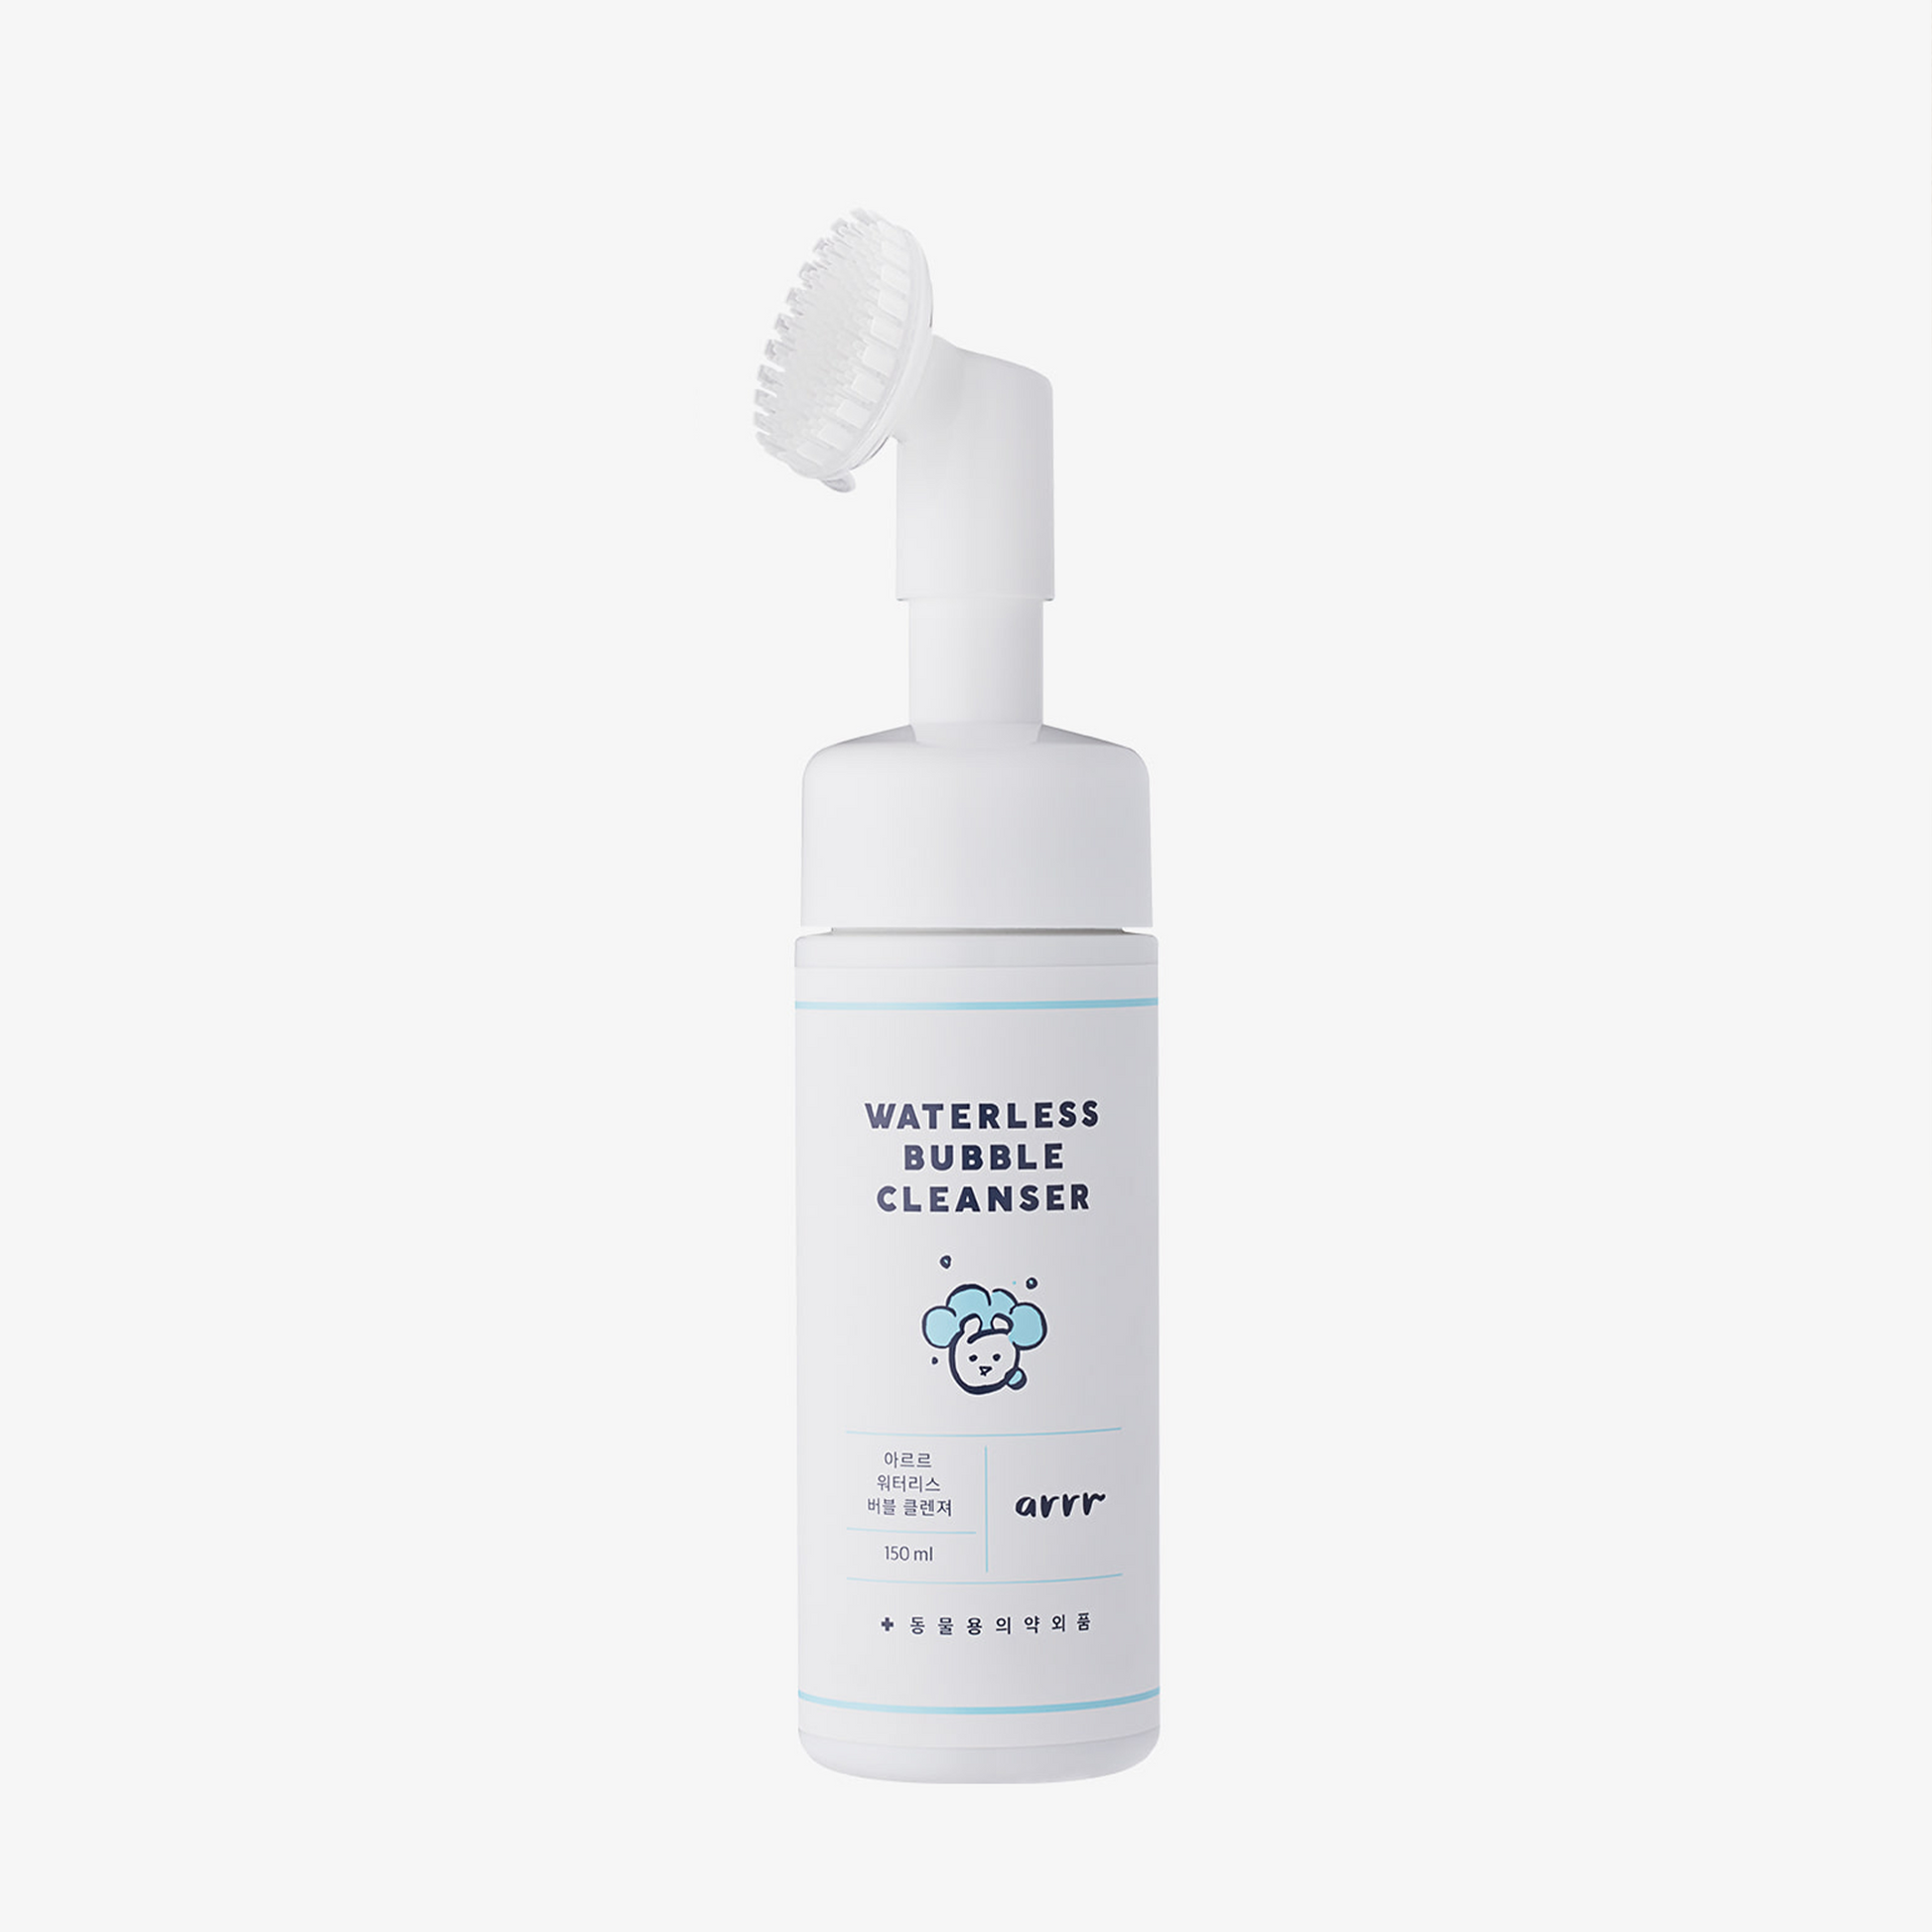 Arrr Waterless Bubble Cleanser for paws cleansing and has a delightful scent. Safe formula removes dirt easily and makes it ideal for a quick wash after a walk.